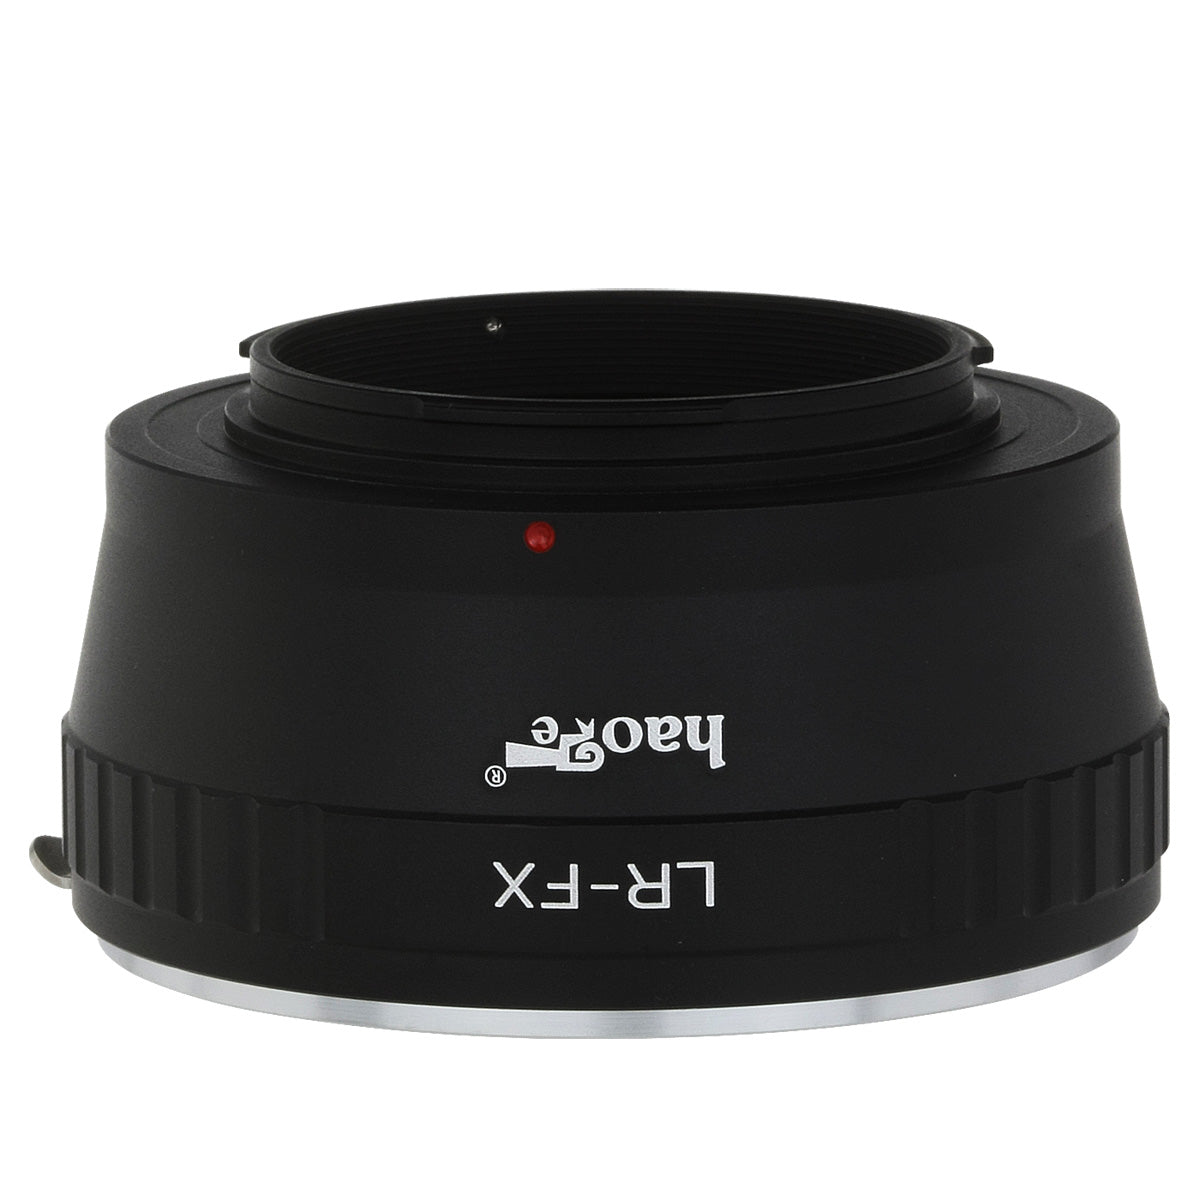 Haoge Lens Mount Adapter for Leica R mount Lens to Fujifilm X-mount Camera such as X-A1, X-A2, X-A3, X-A10, X-E1, X-E2, X-E2s, X-M1, X-Pro1, X-Pro2, X-T1, X-T2, X-T10, X-T20